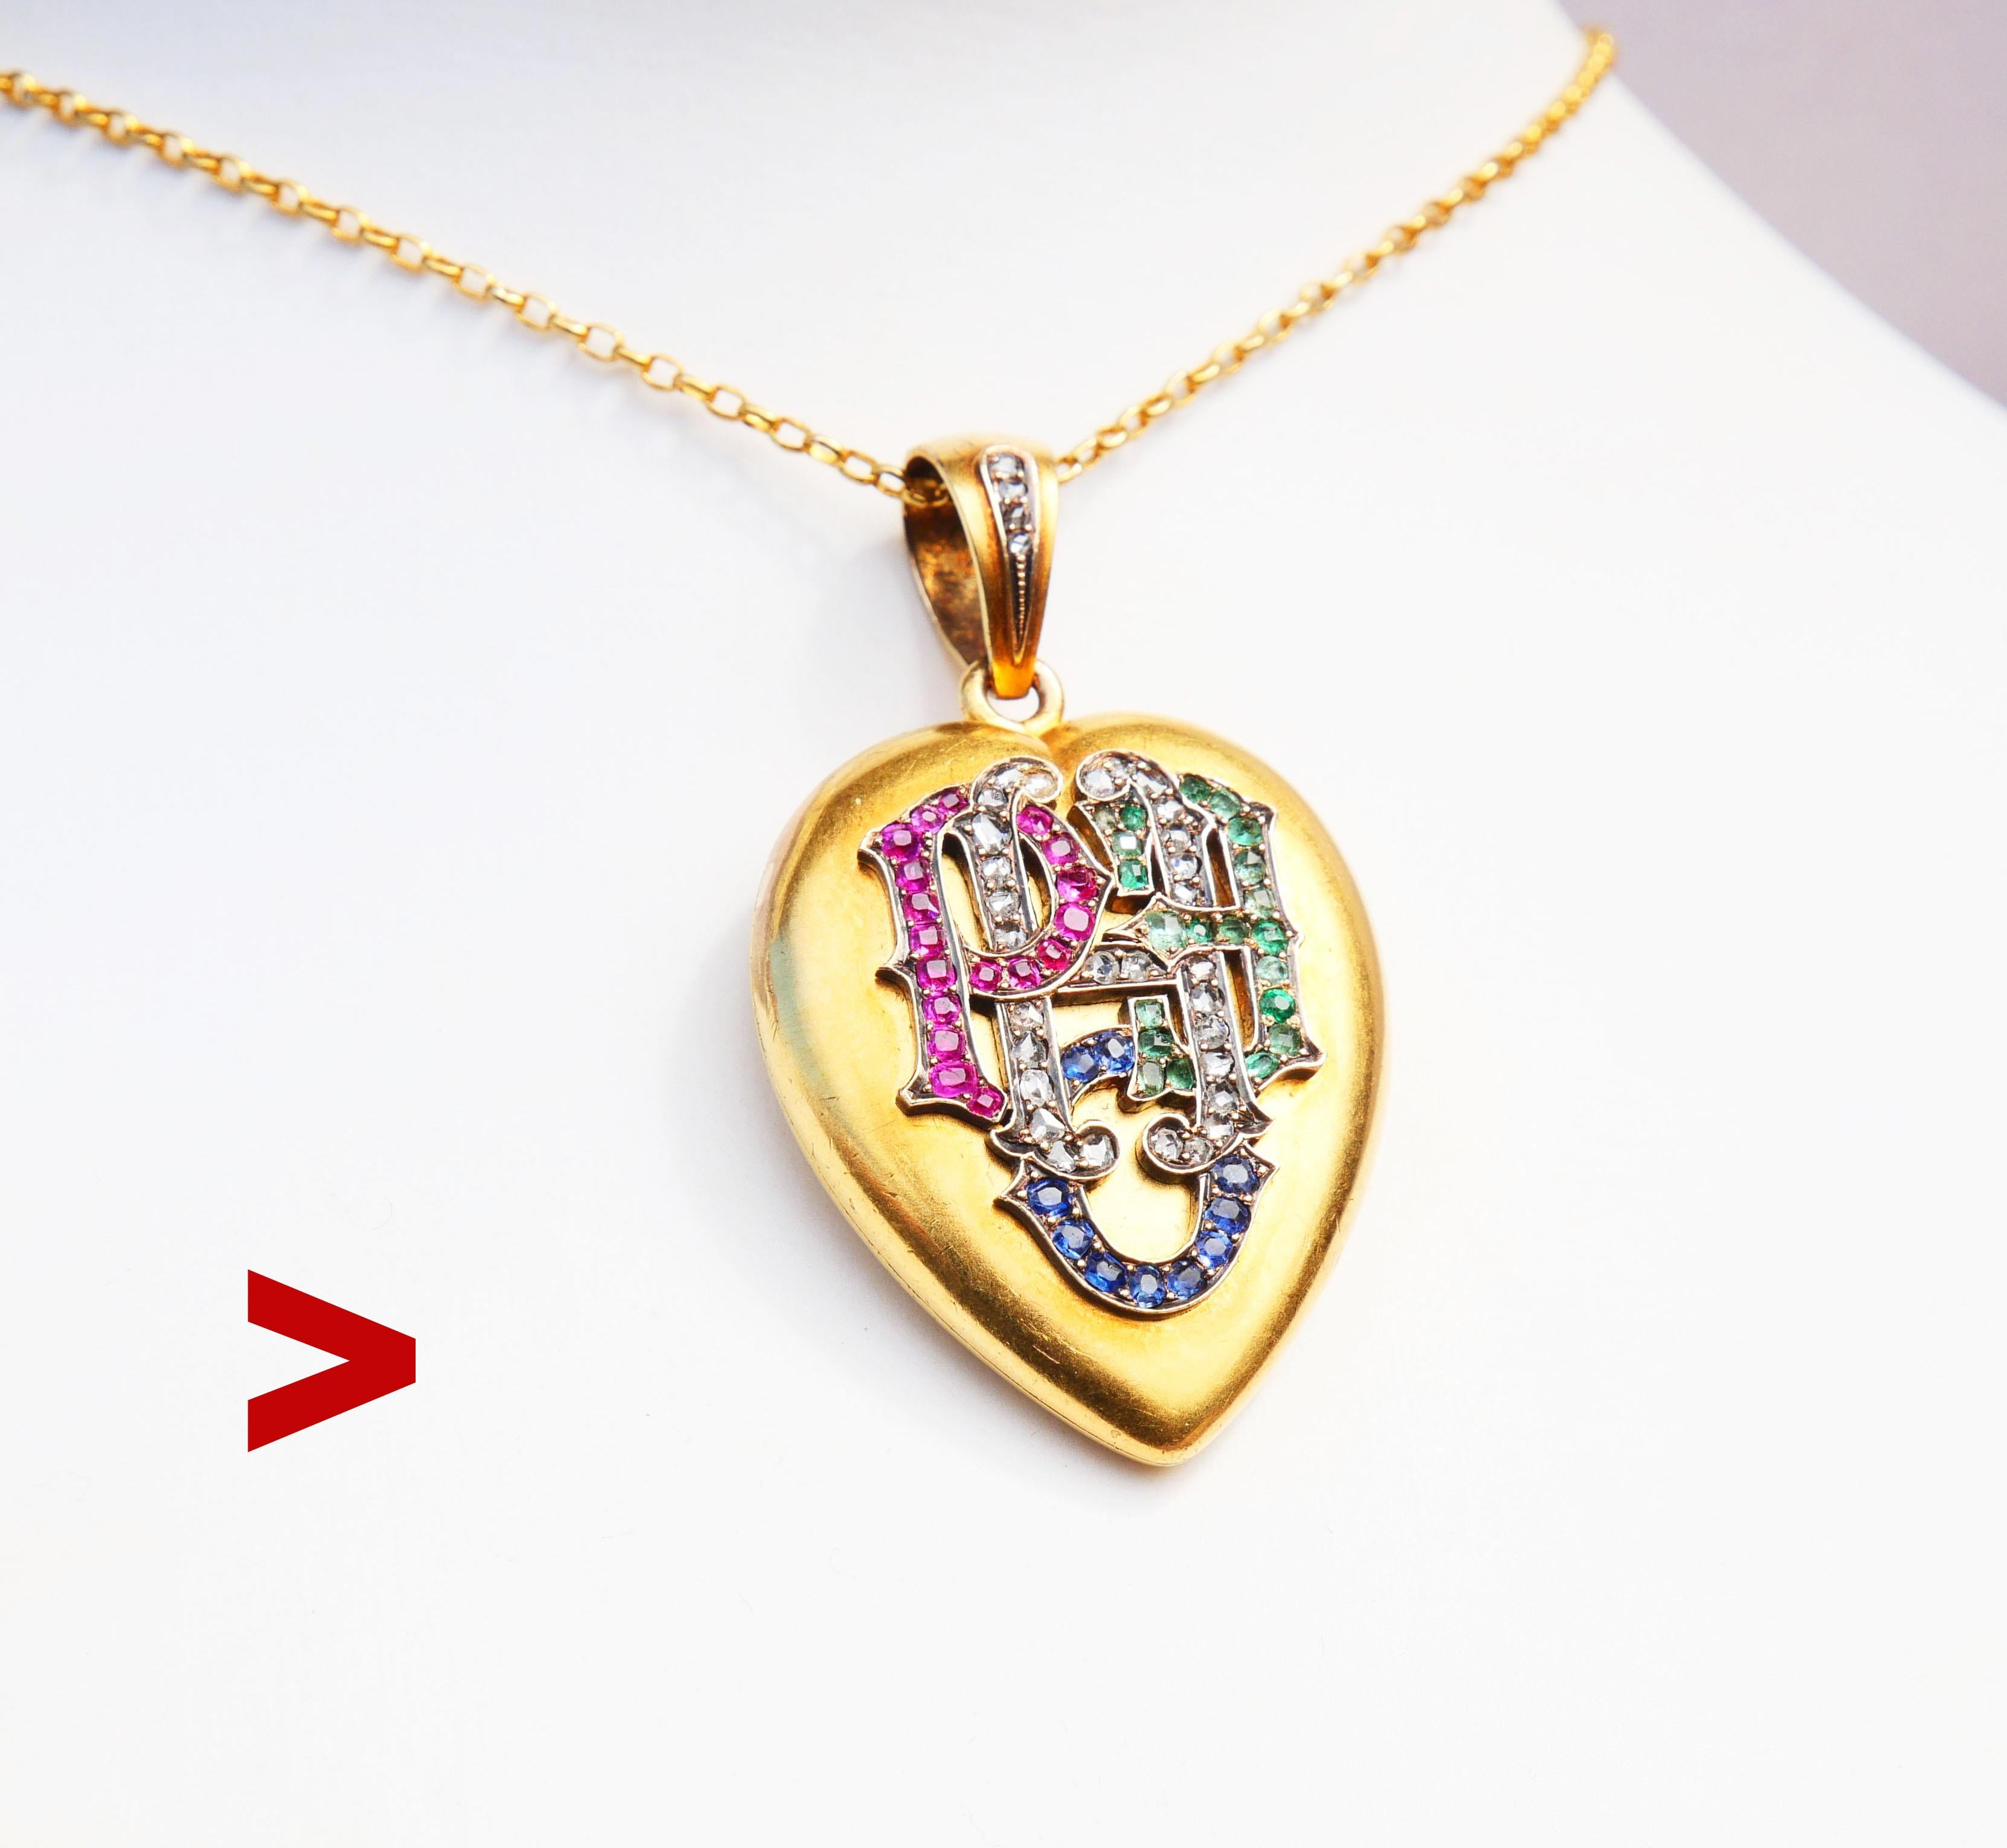 Antique British or American Pendant / Locket in solid 14K Gold , ca. late 19th - early 20th century with openwork raised socket HOPE combination decorated with Diamonds, Sapphires, Rubies and Emeralds. Bail decorated with rose - cut Diamonds. Both